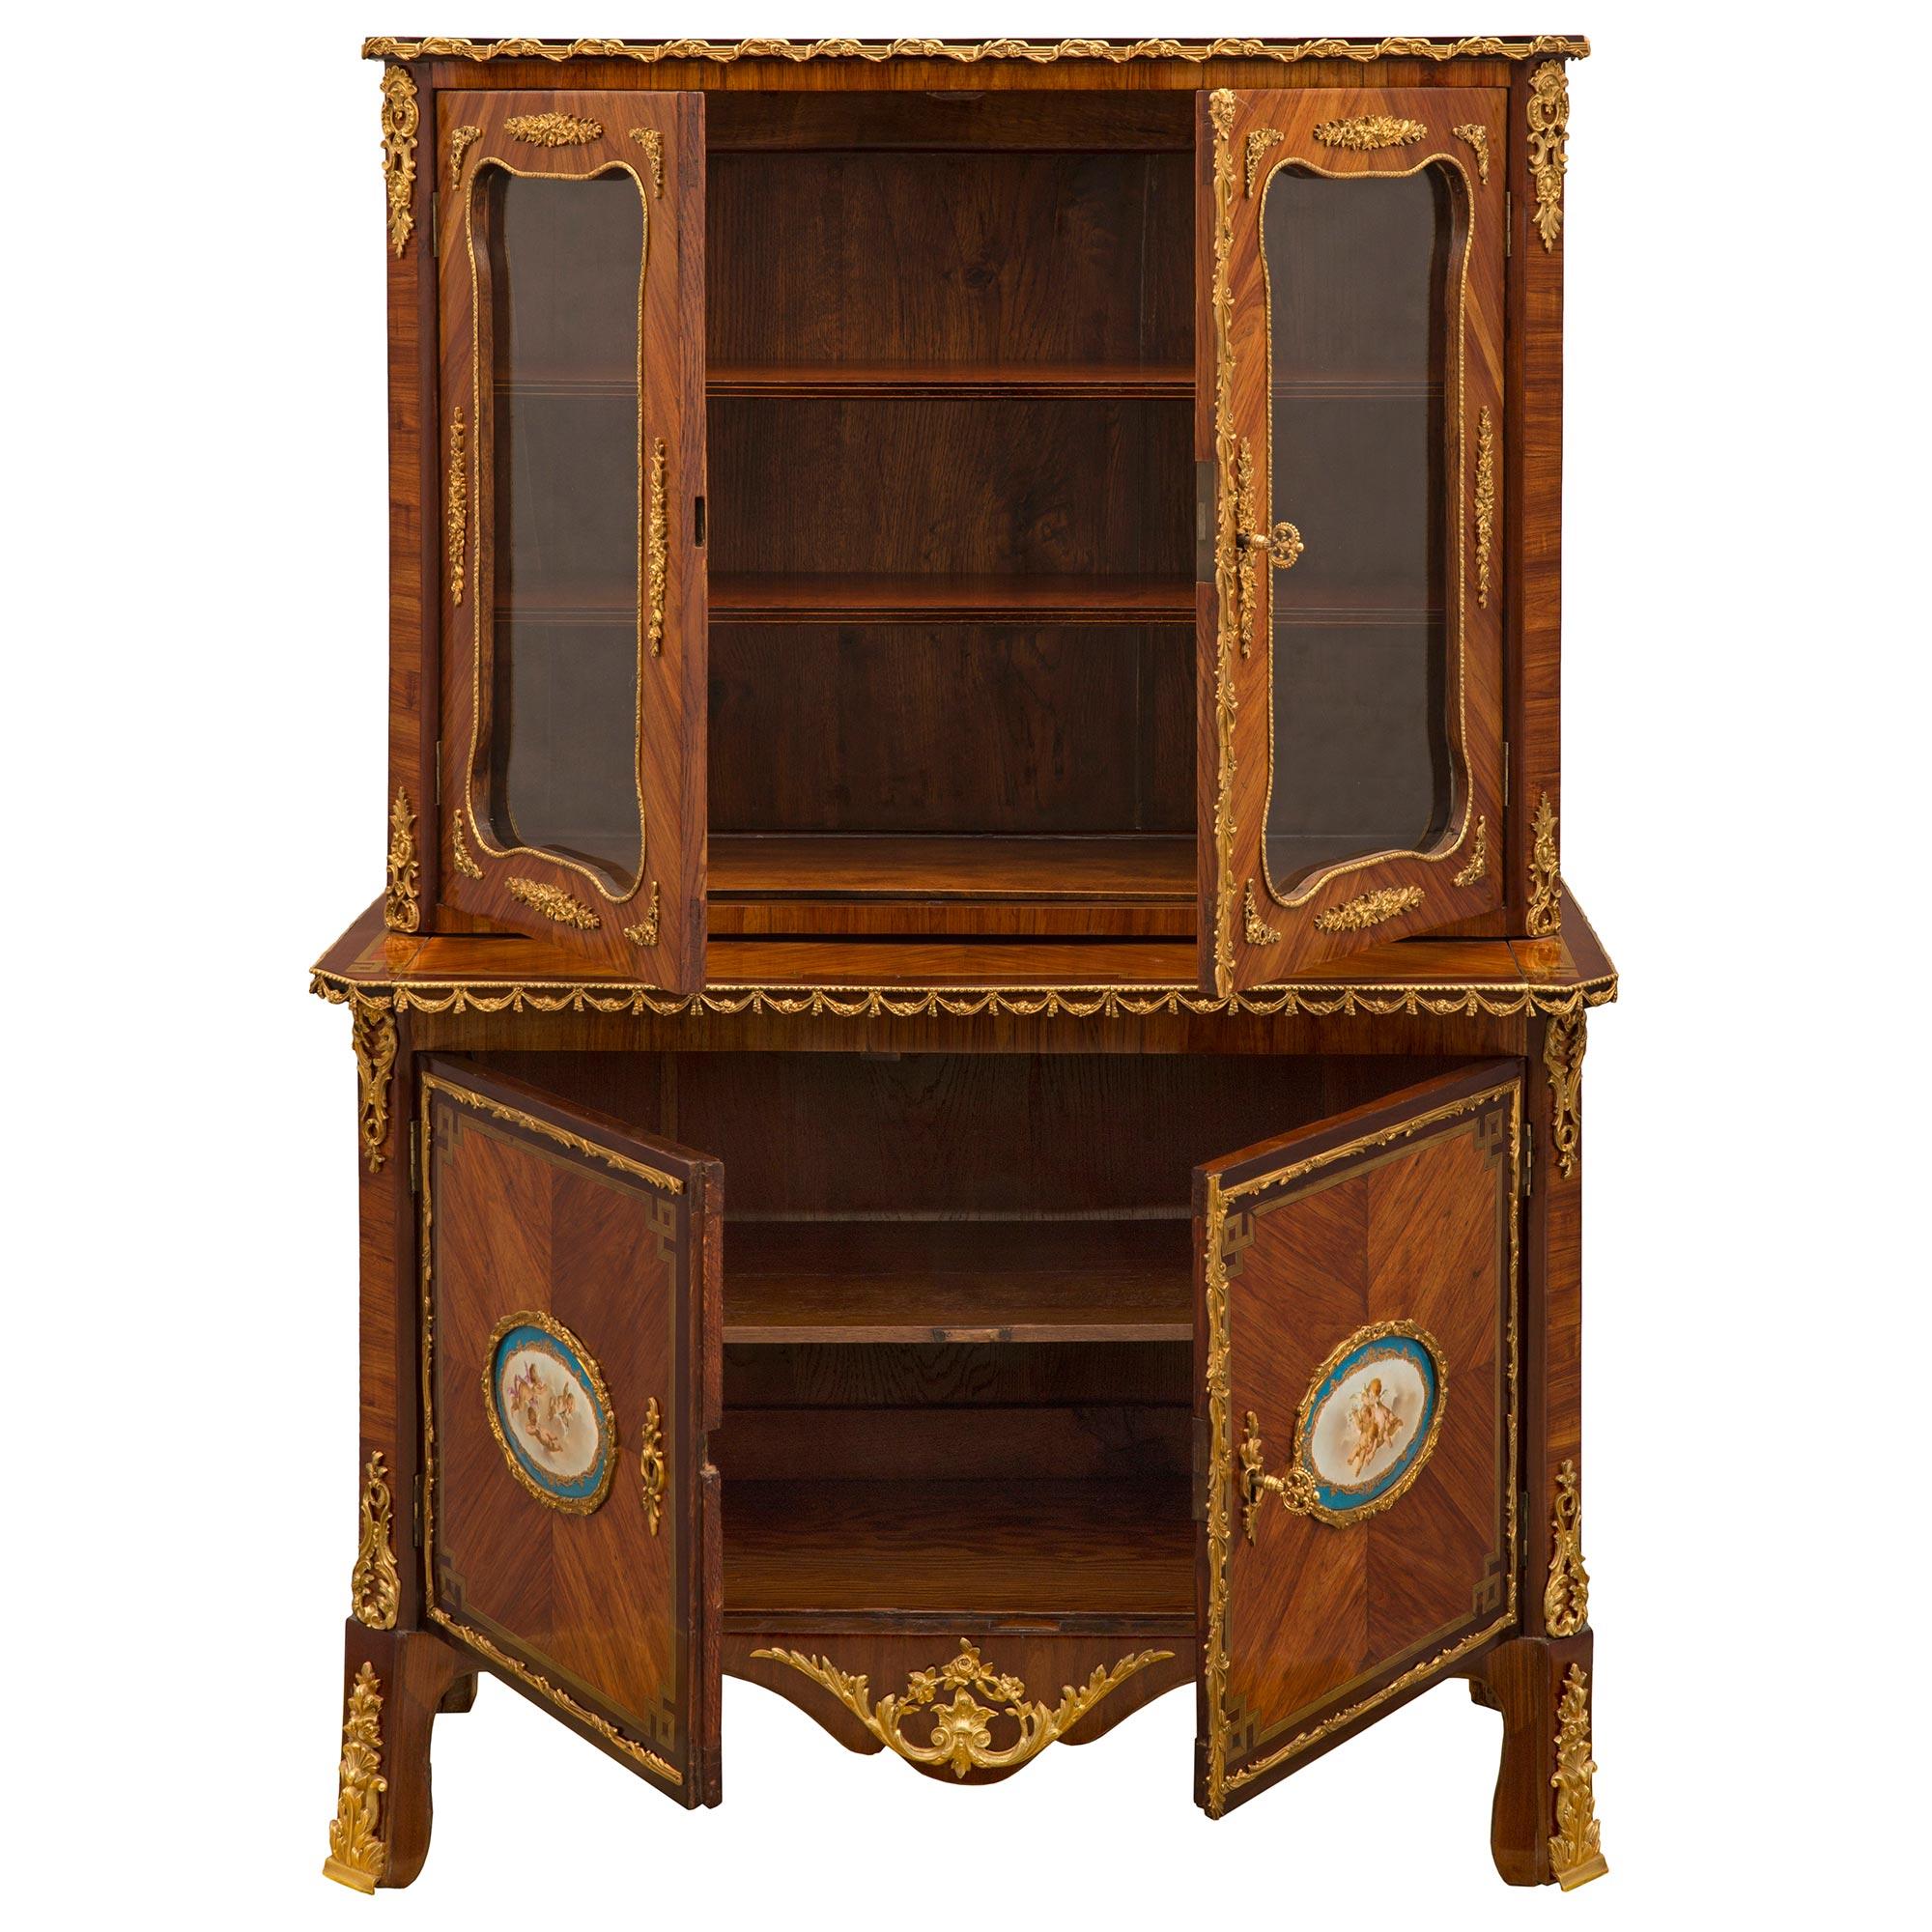 An elegant and high quality French early 19th century Louis XVI st. Kingwood, Tulipwood, Charmwood, ormolu and Sèvres porcelain cabinet vitrine. The four door vitrine is raised by fine block feet with exceptional foliate ormolu sabots flanking the